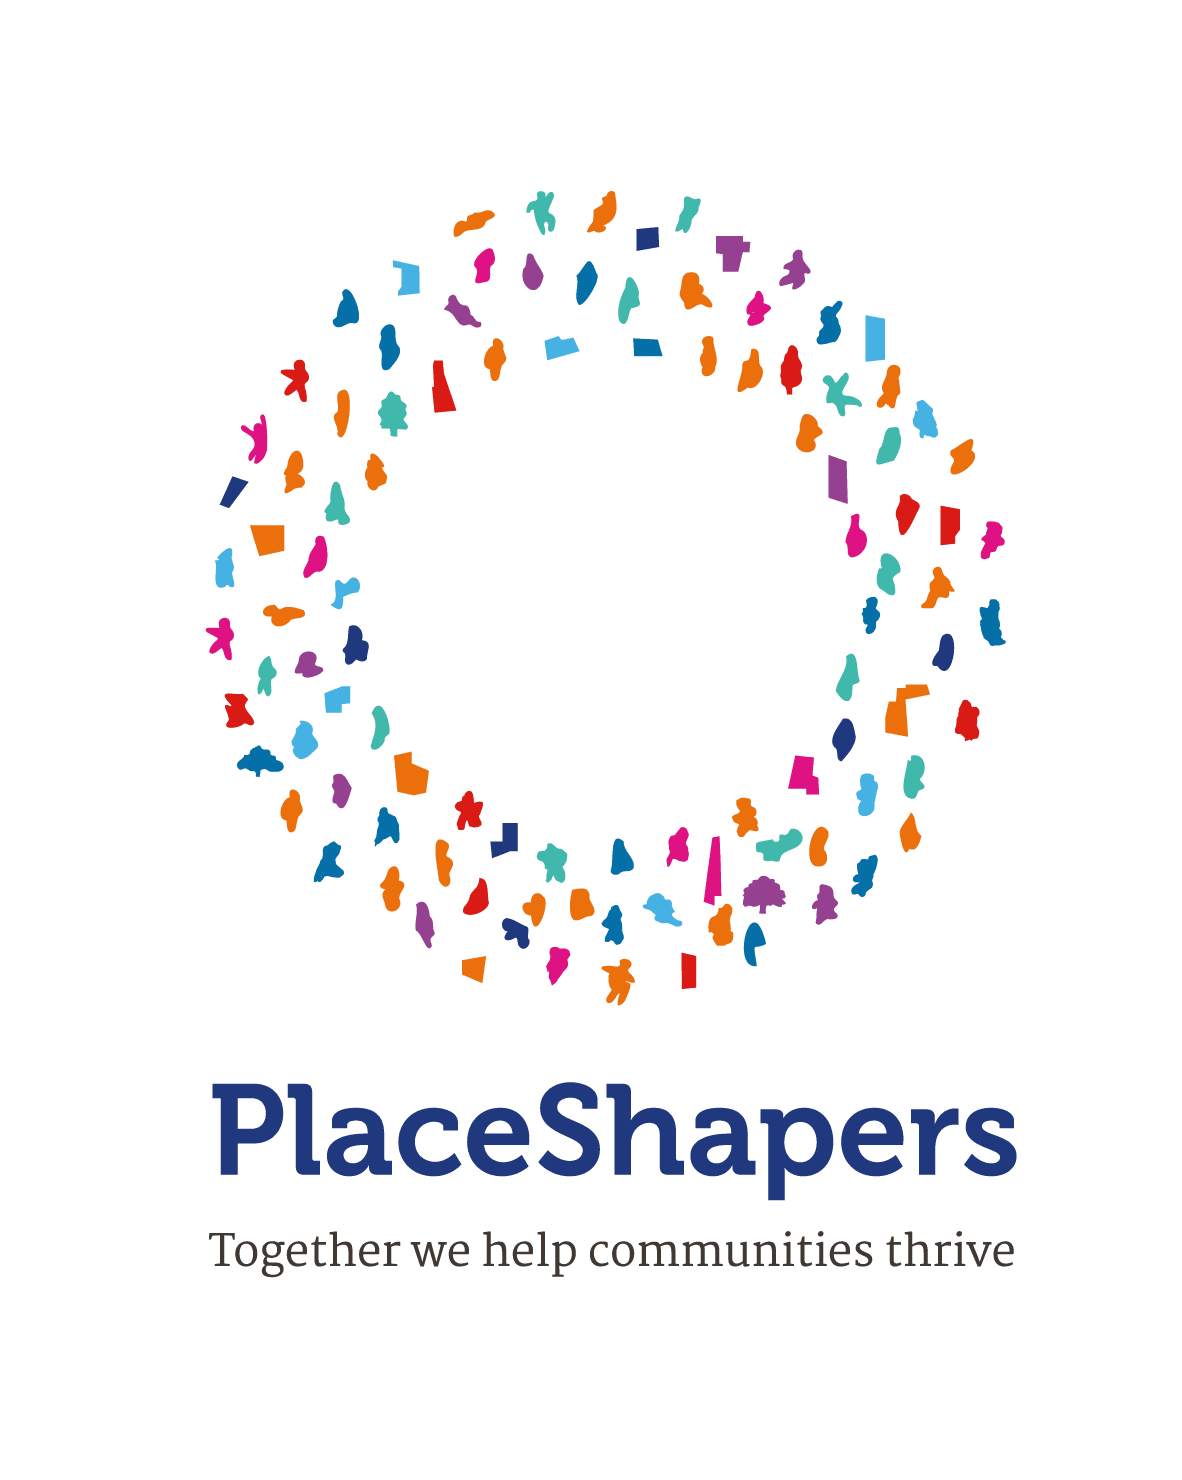 PlaceShapers logo